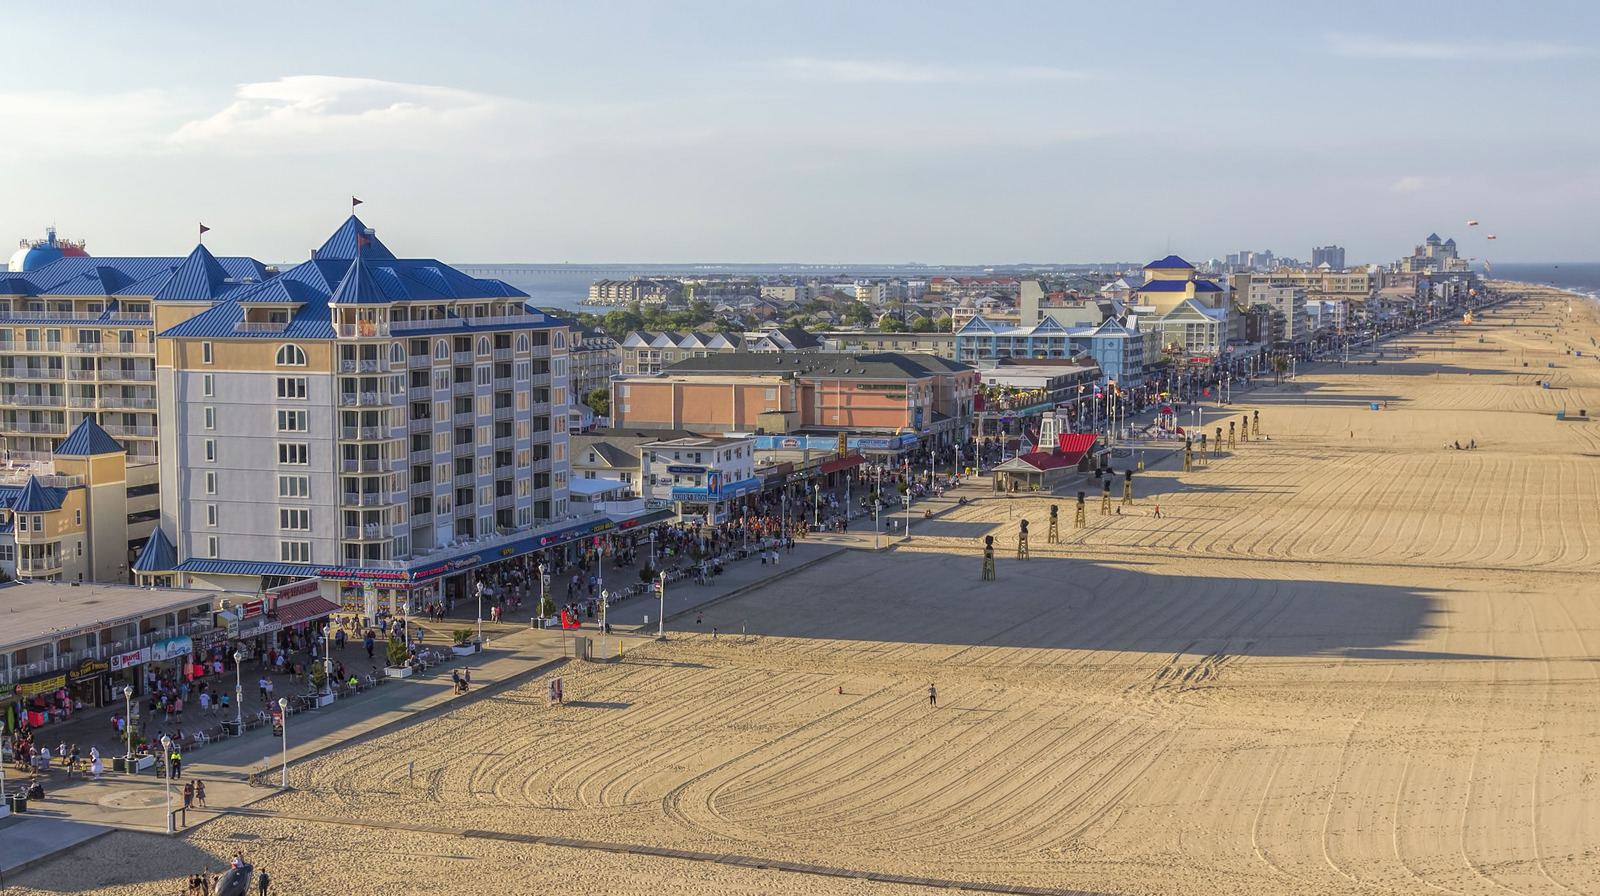 Maryland Or New Jersey: Which Ocean City Is Right For Your Beach ...